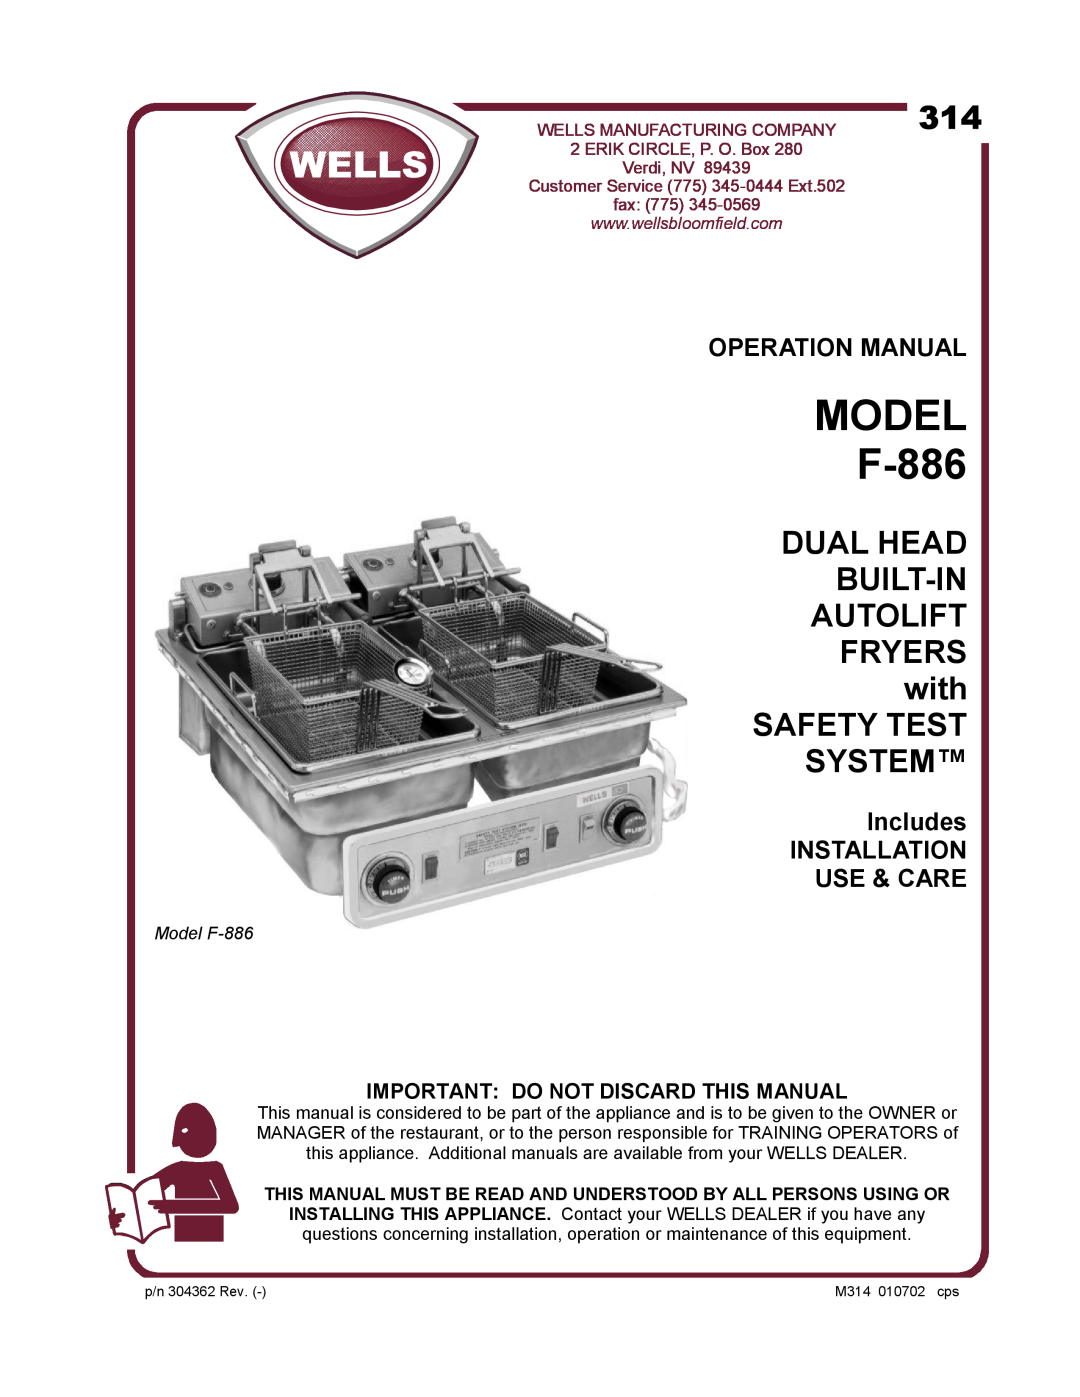 Wells operation manual Includes INSTALLATION USE & CARE, Important Do Not Discard This Manual, MODEL F-886, Verdi, NV 